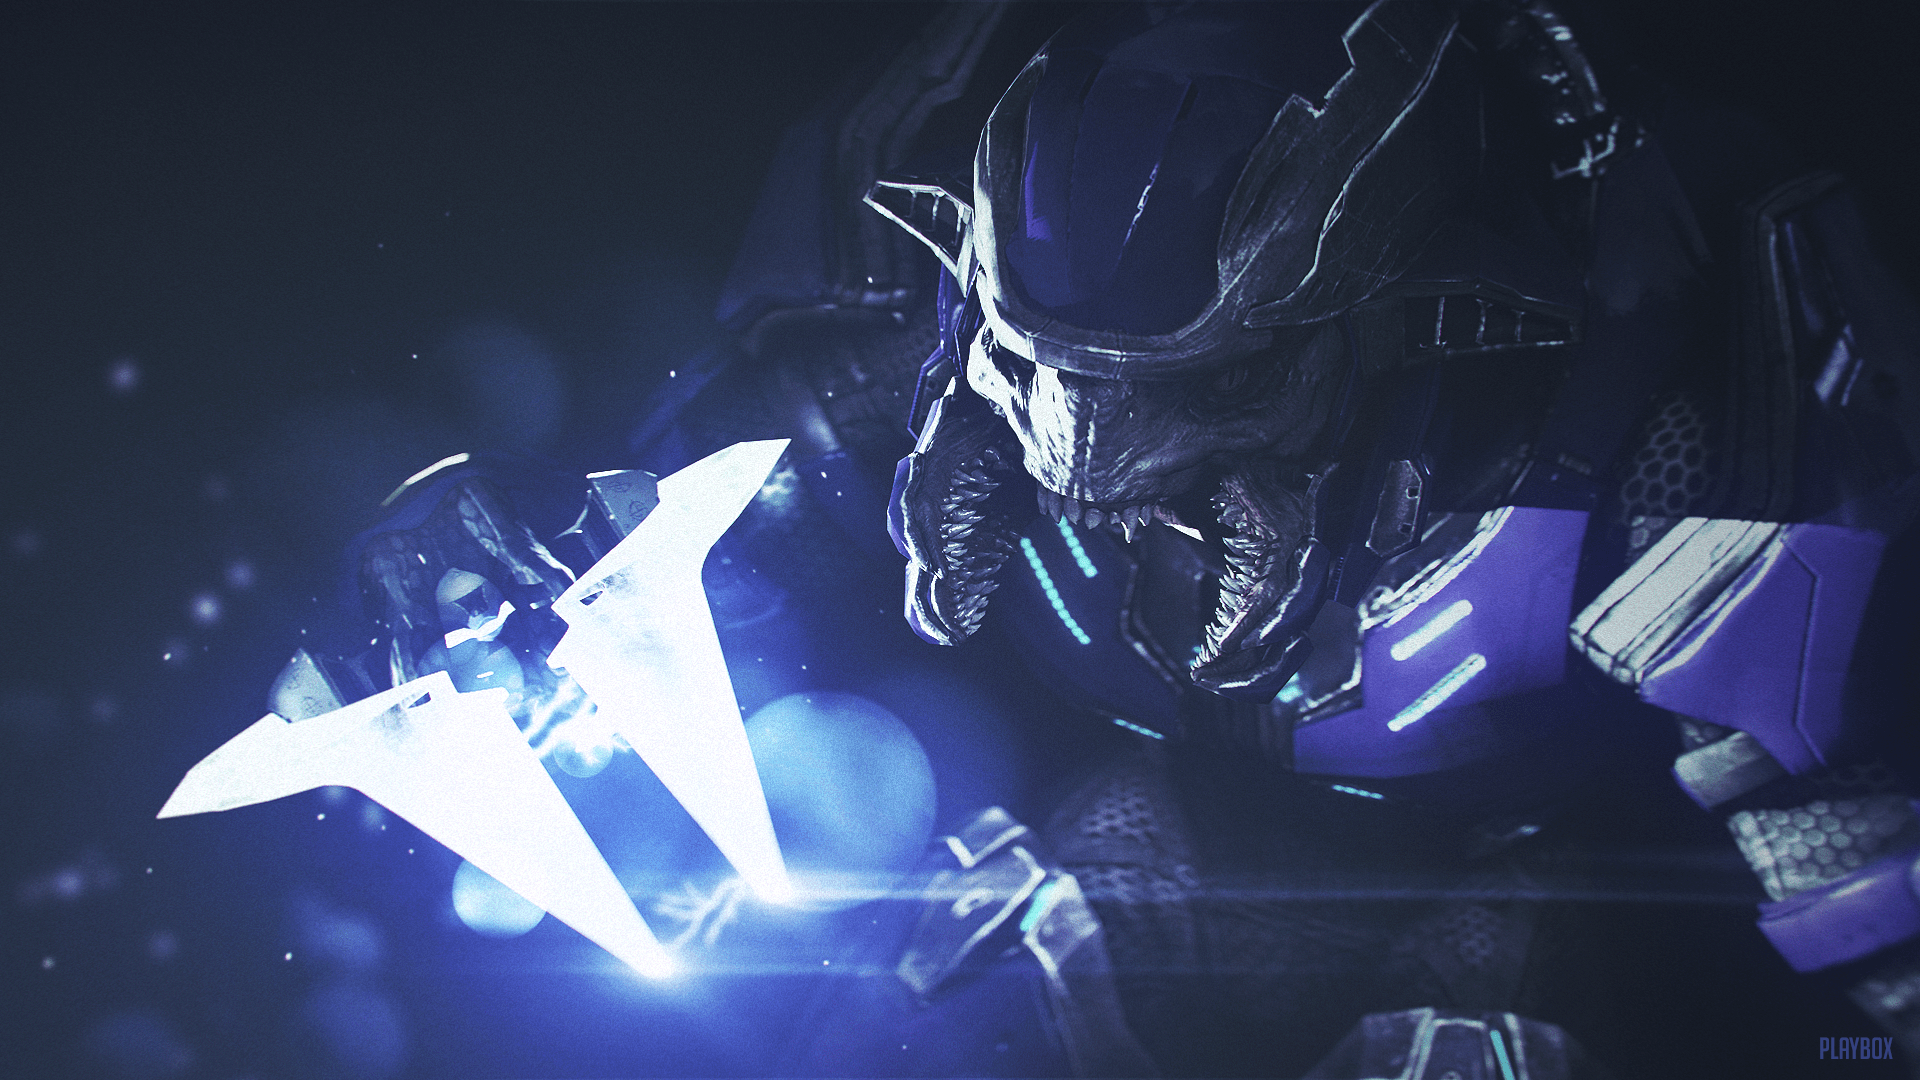 the covenant halo